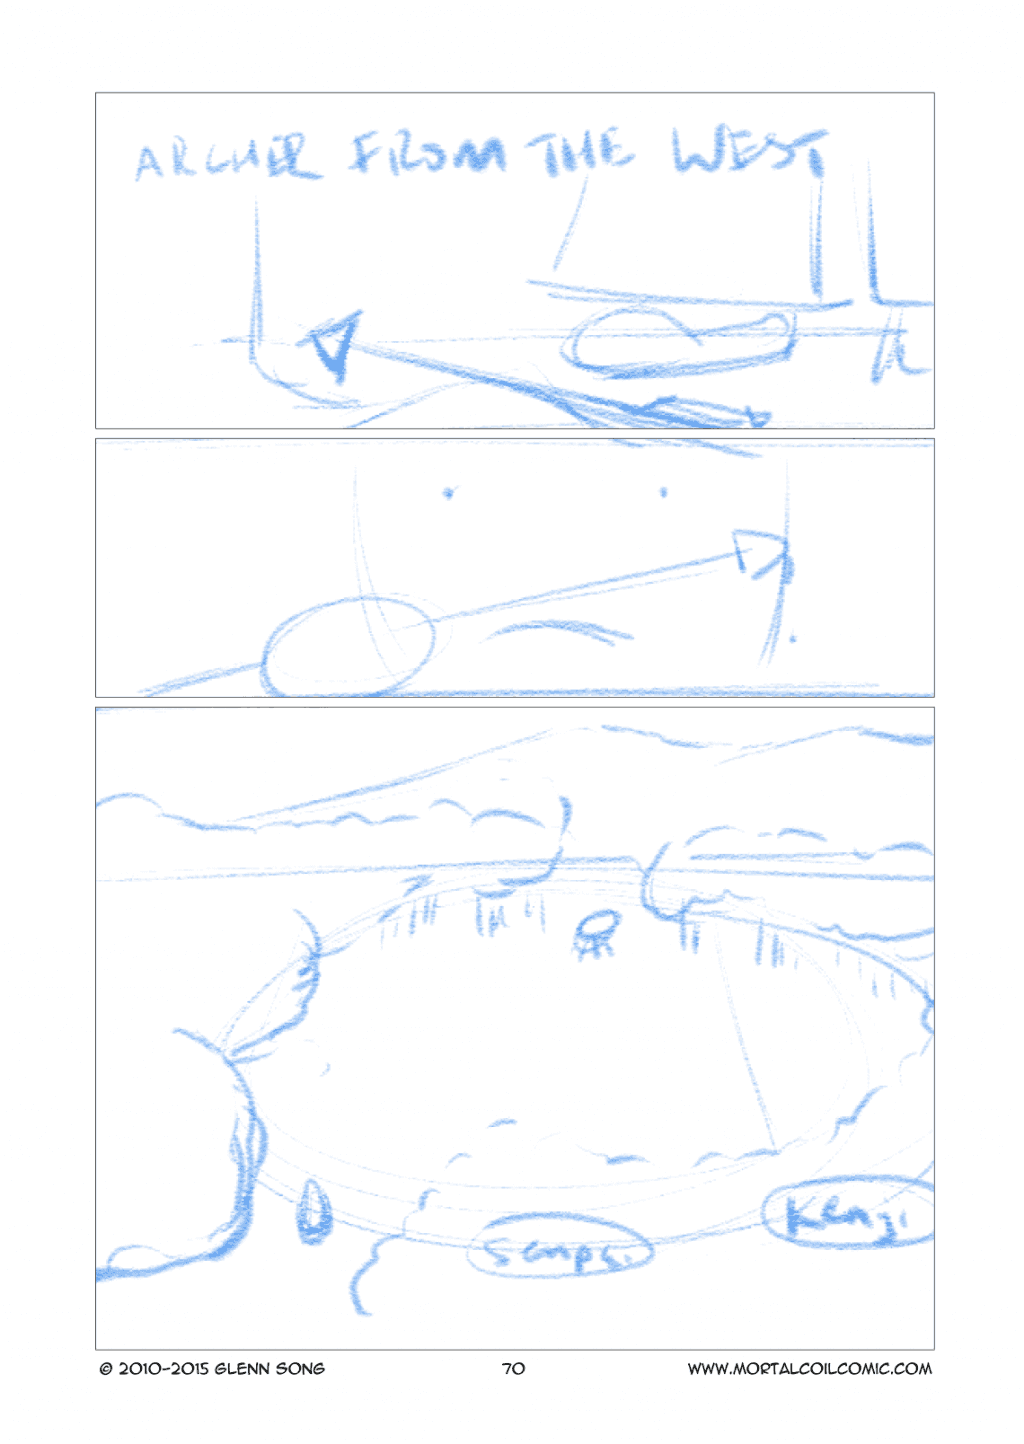 Archer of the West - 1 Storyboard